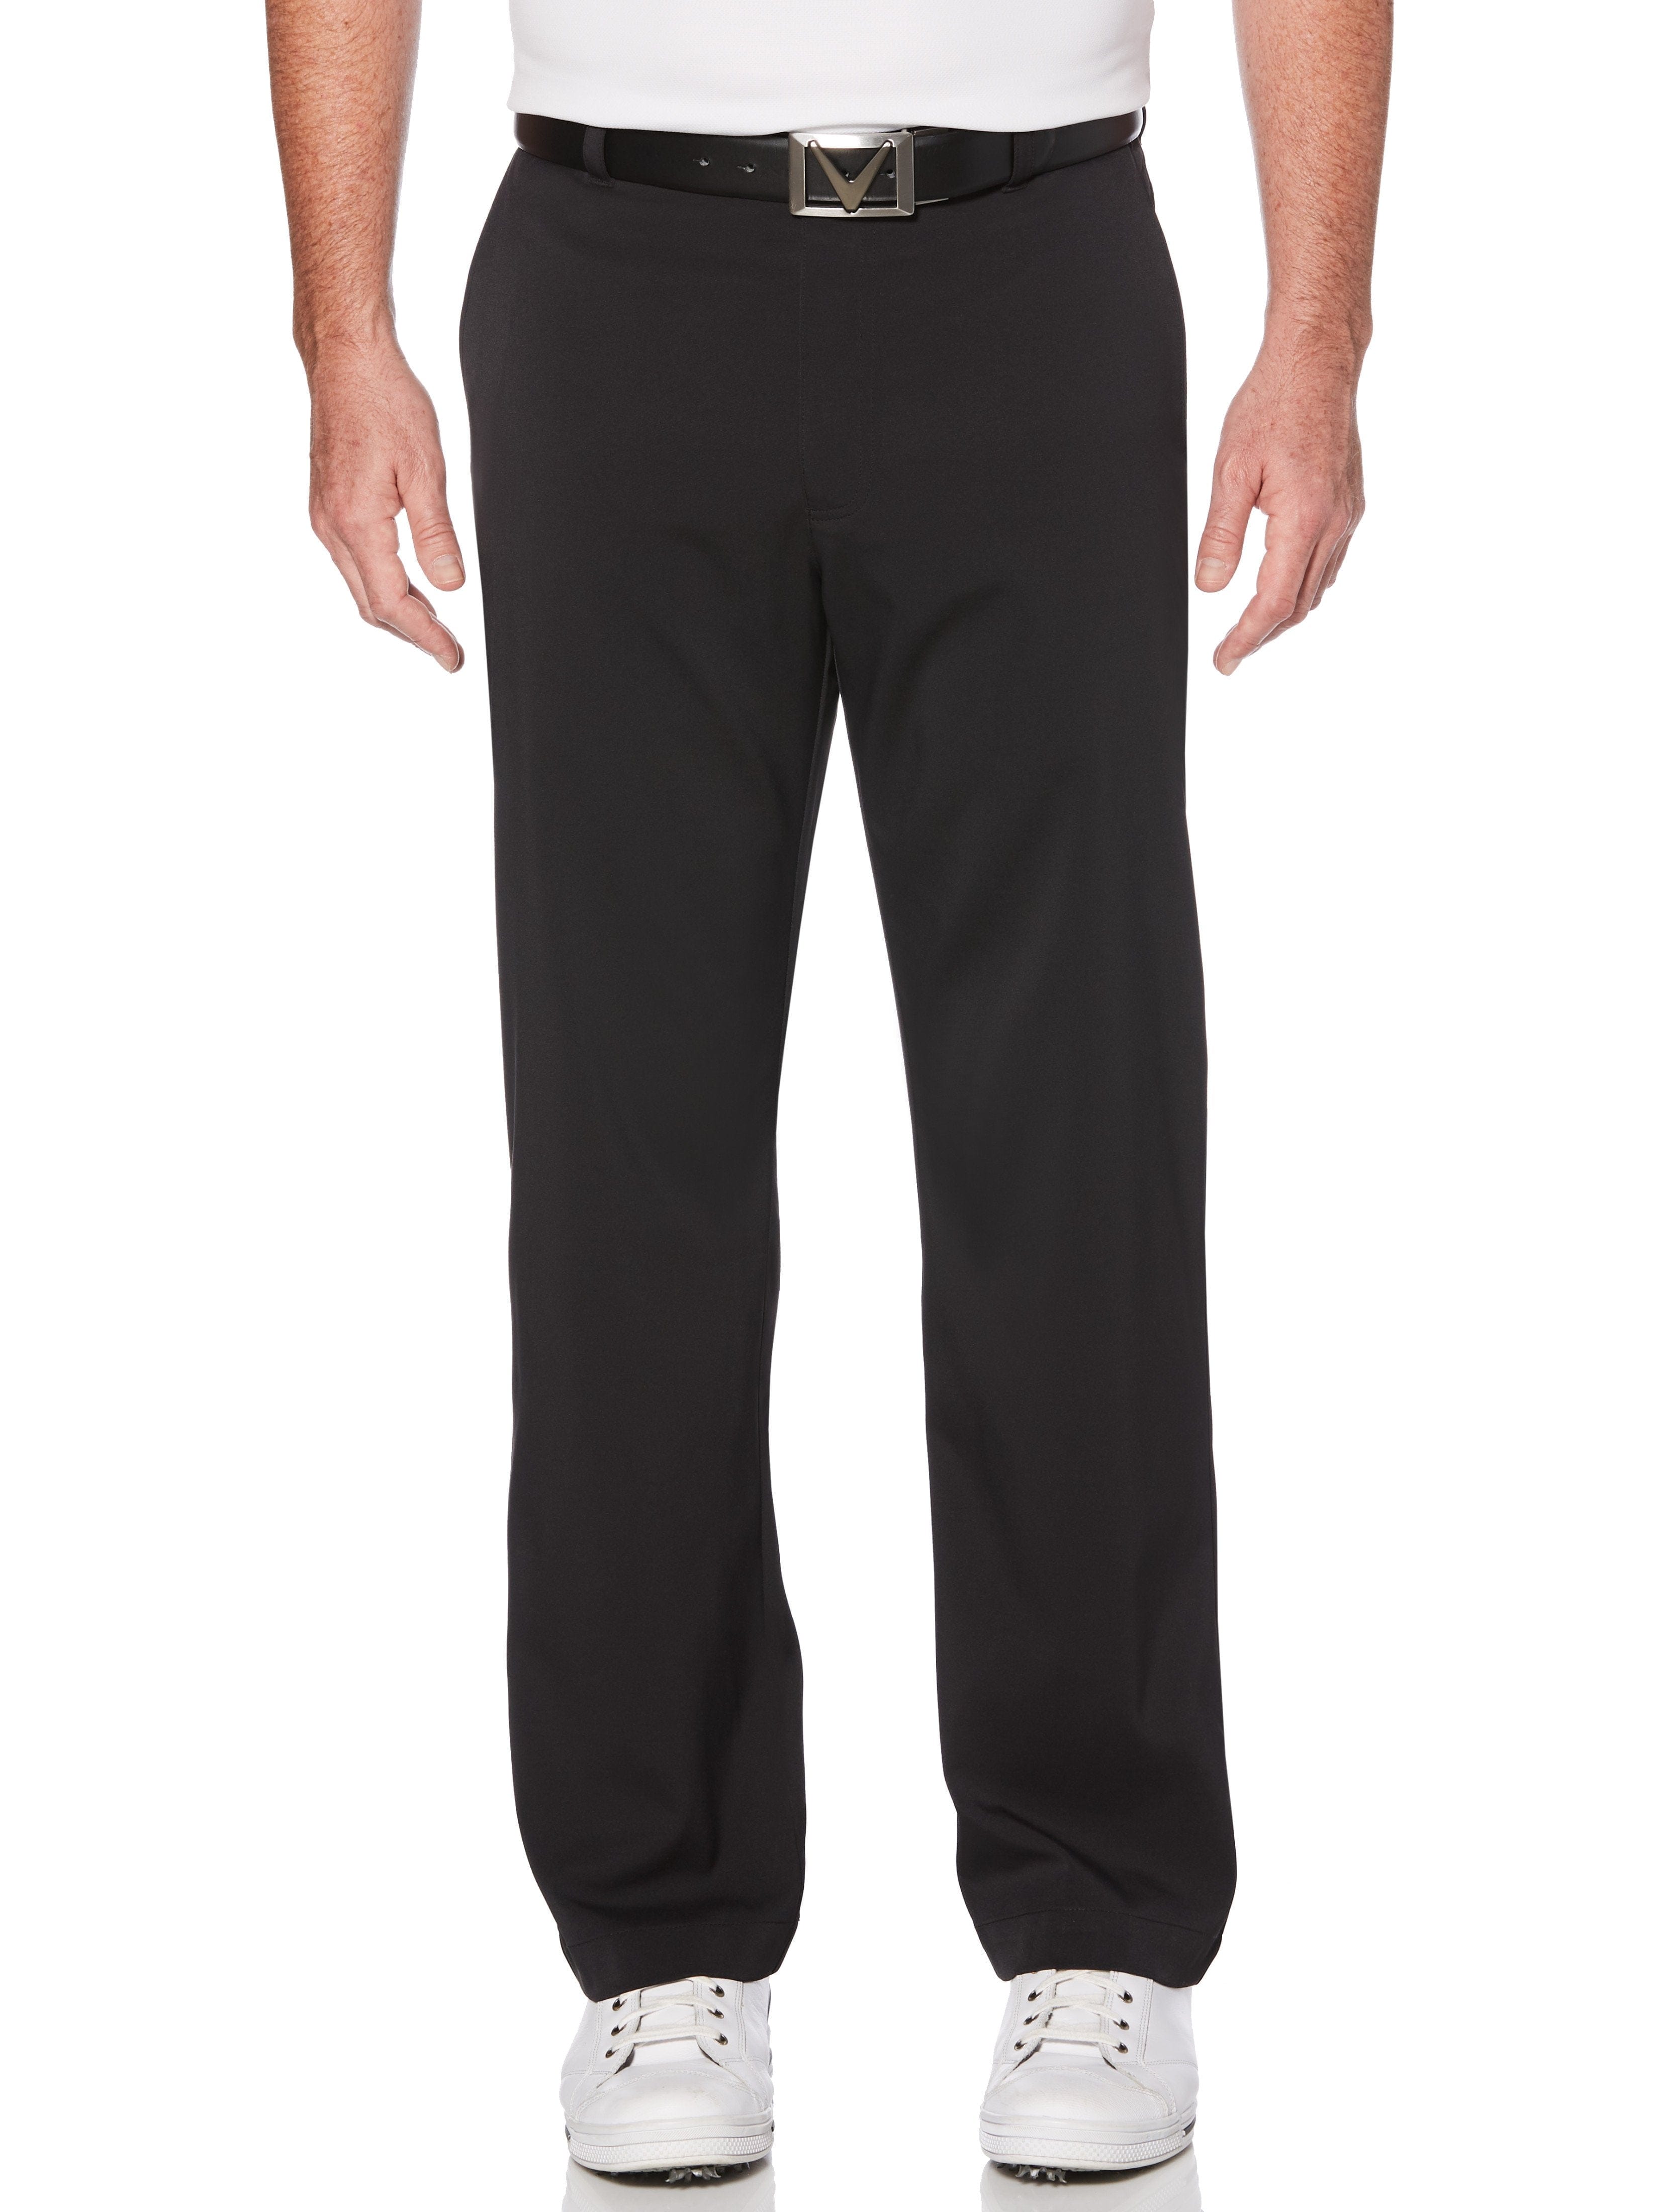 Big & Tall Pro Spin 3.0 Stretch Golf Pants with Active Waistband ...